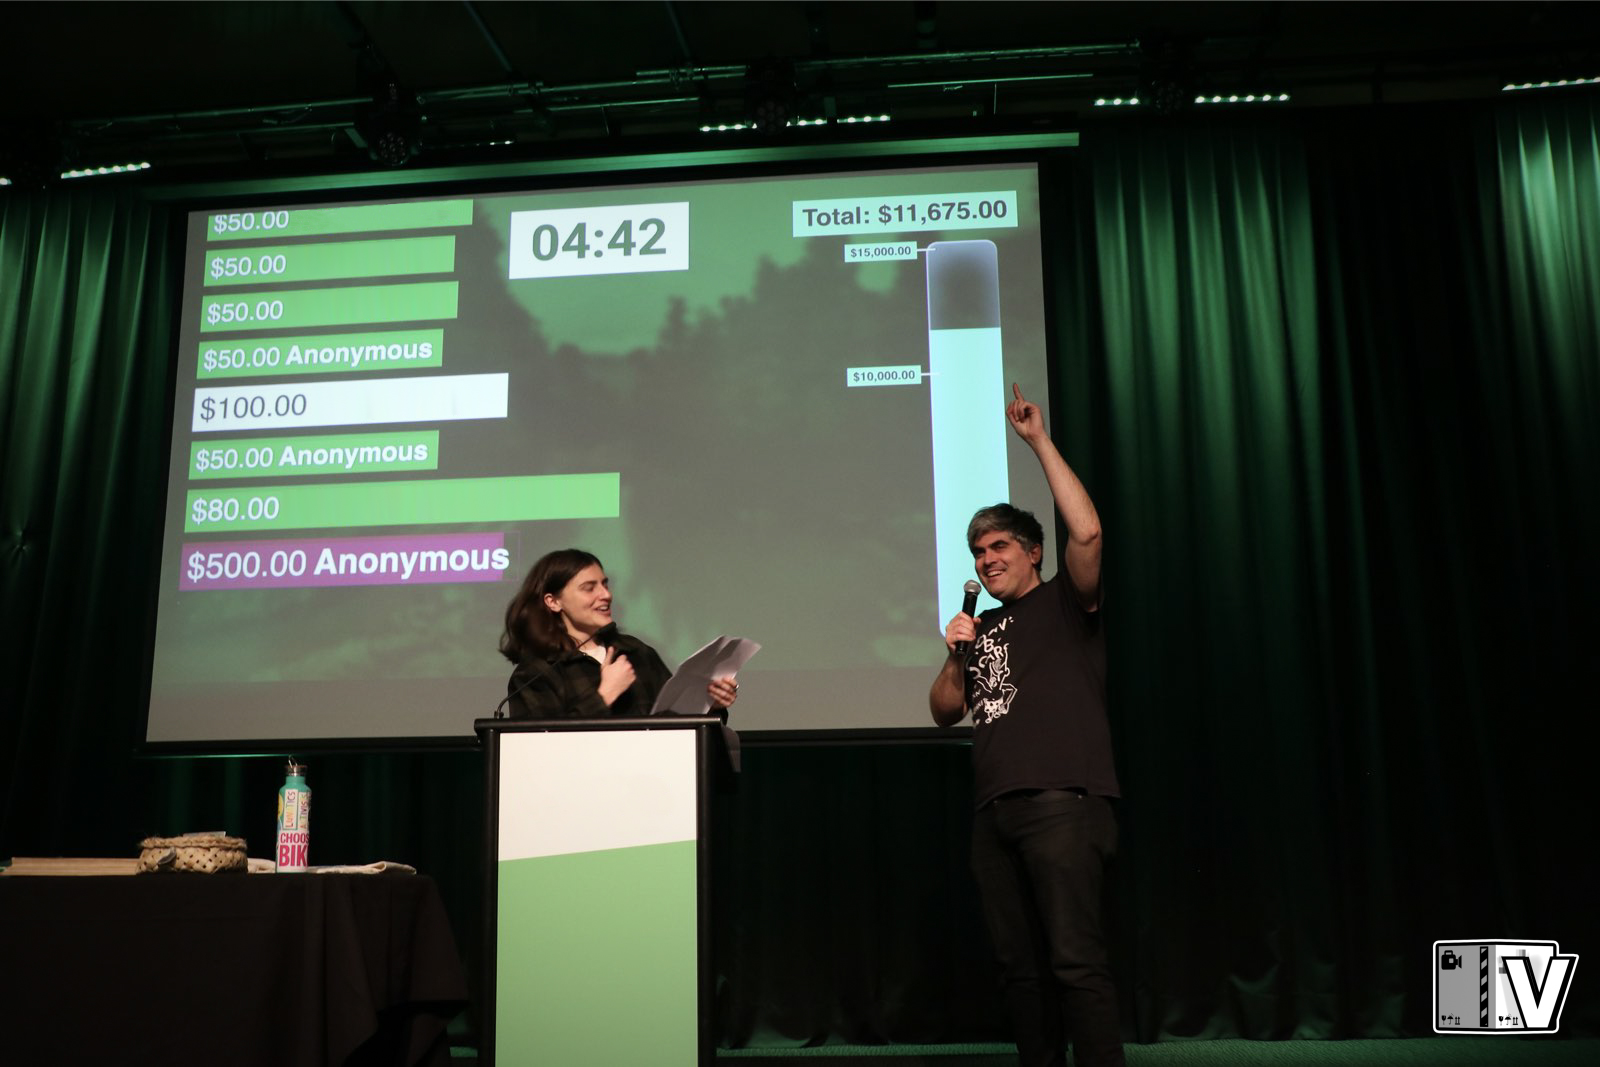 Chlöe Swarbrick MP and Mayor Aaron Hawkins hosting a fundraising event for the Green Party of Aotearoa New Zealand. Aaron points at the screen which has a live ticker of pledges and a thermometer showing progress towards their goal, while Chlöe reads off a paper into a lecturn microphone.